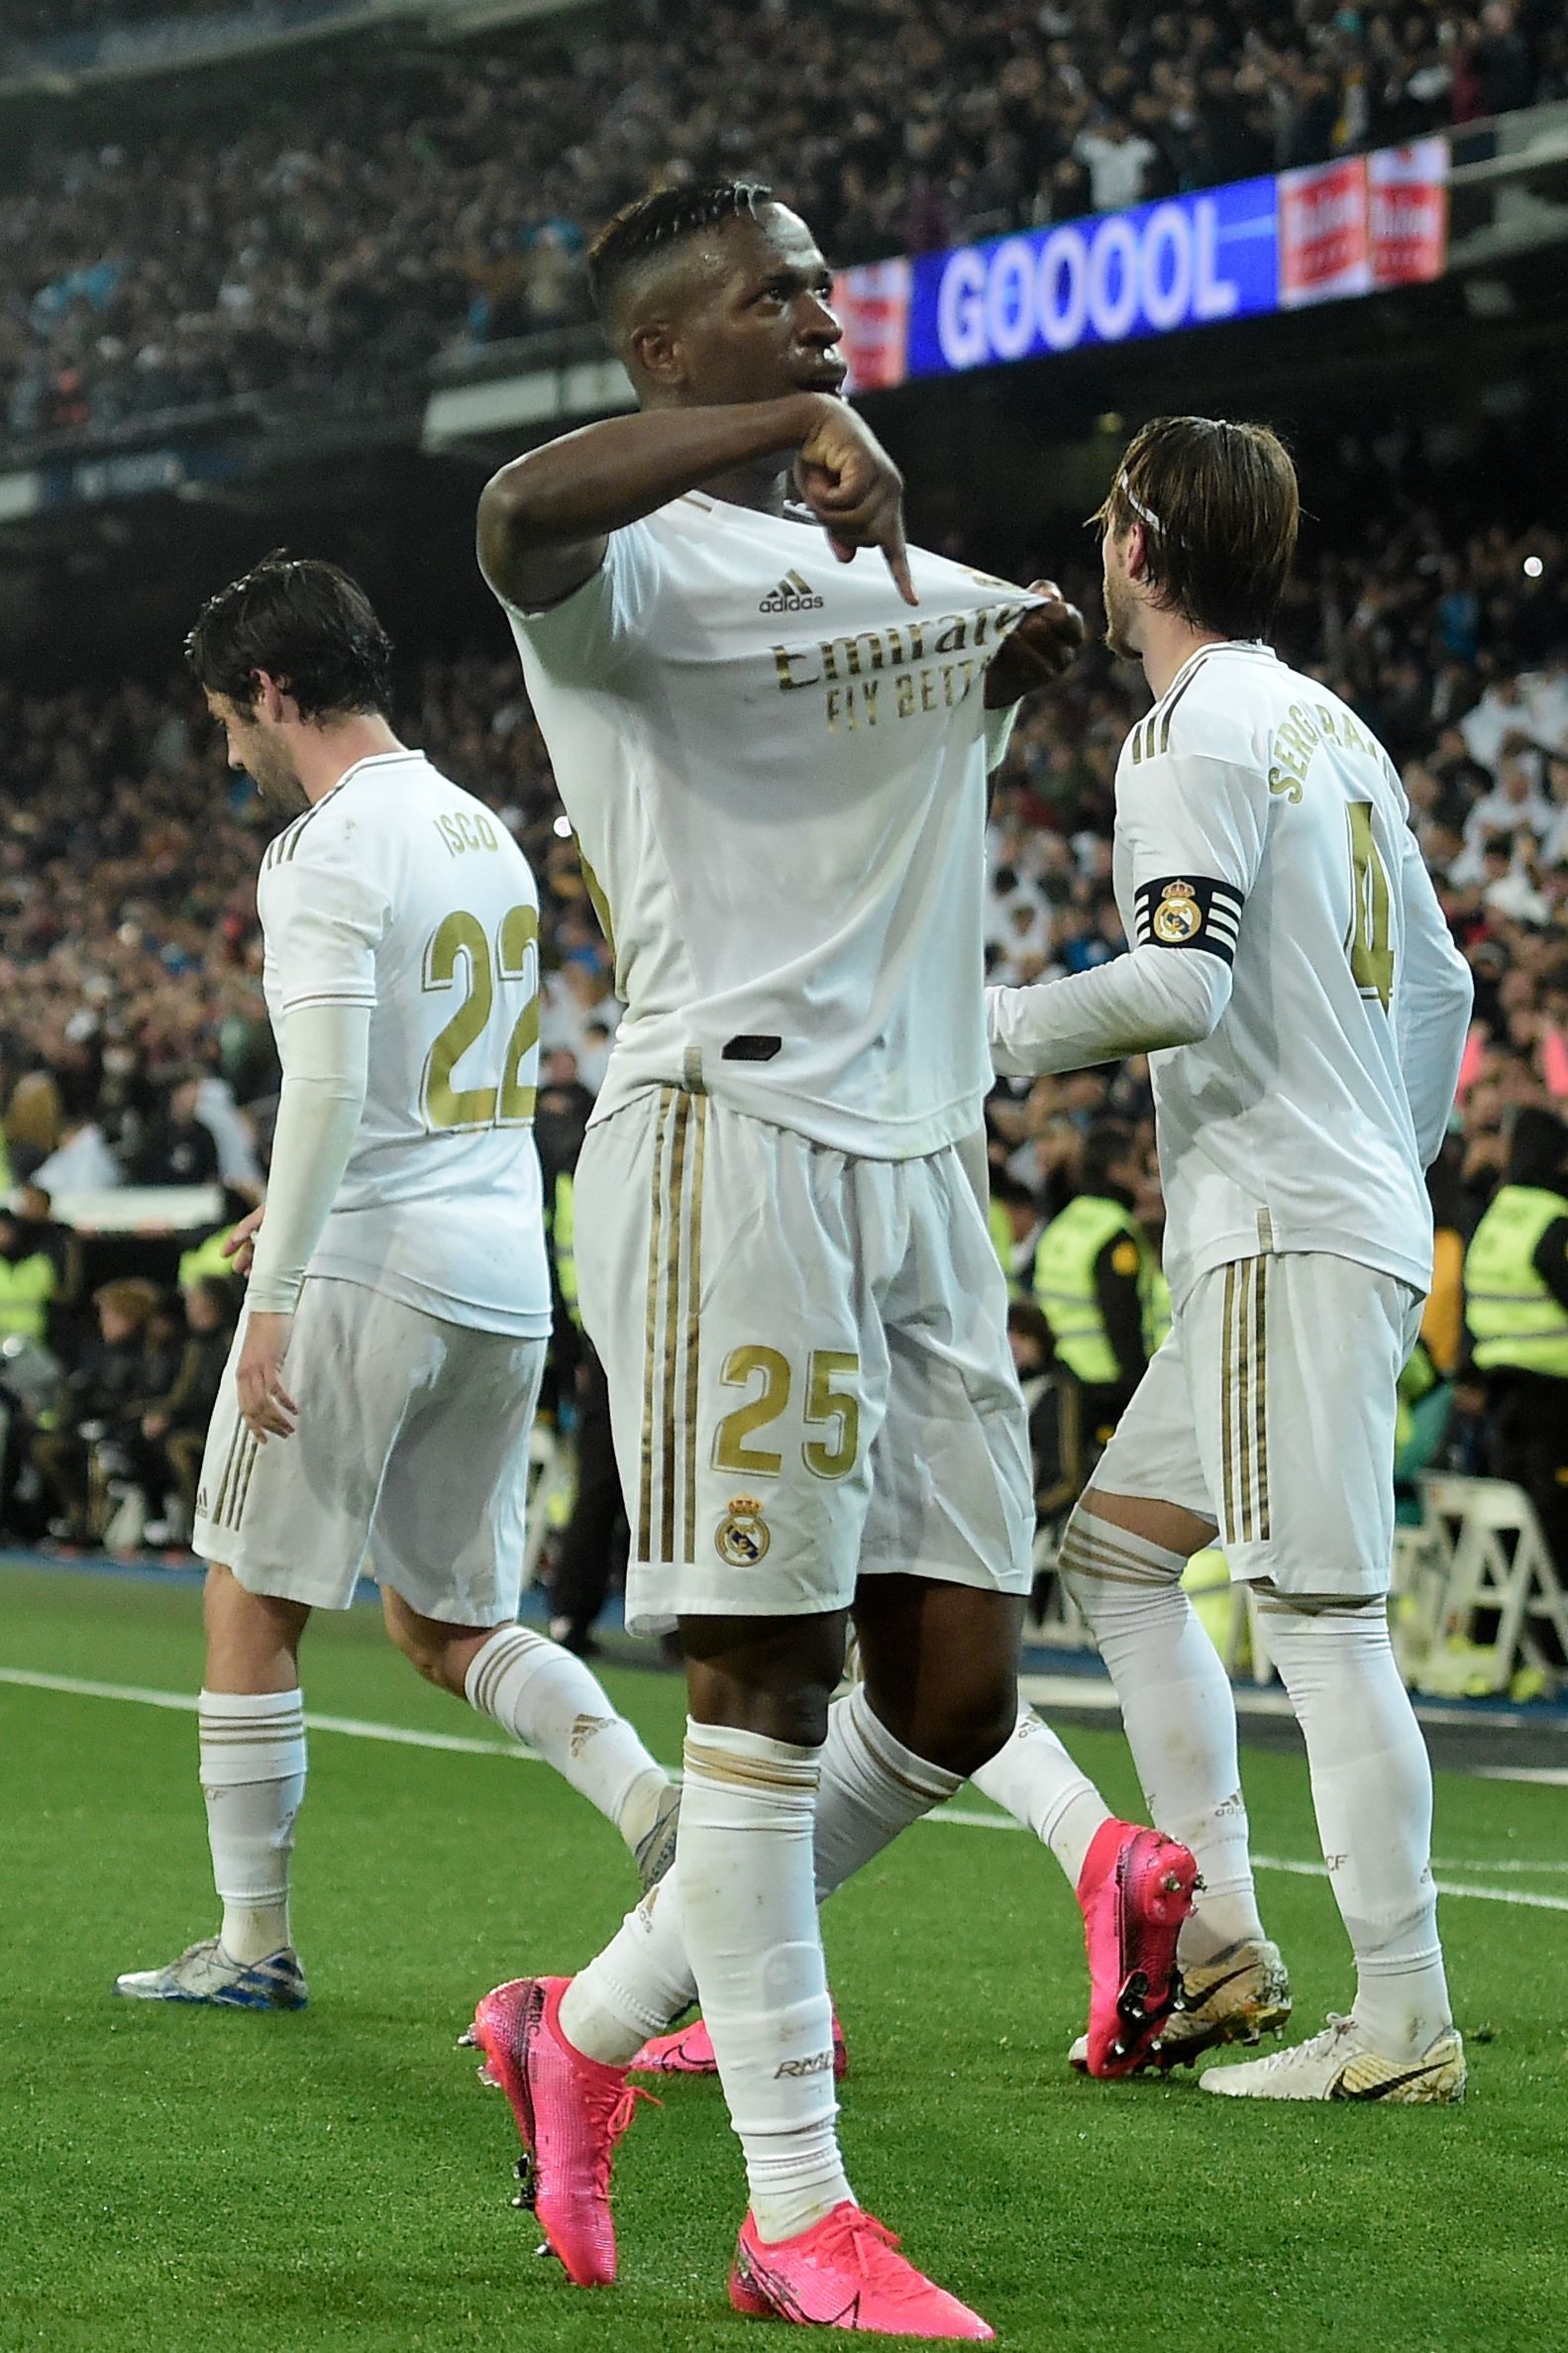 Real Madrids Brazilian forward lt;HIT gt;Vinicius lt;/HIT gt; Junior (C) celebrates after scoring a goal during the Spanish League football match between Real Madrid and Barcelona at the Santiago Bernabeu stadium in Madrid on March 1, 2020. (Photo by OSCAR DEL POZO / AFP)